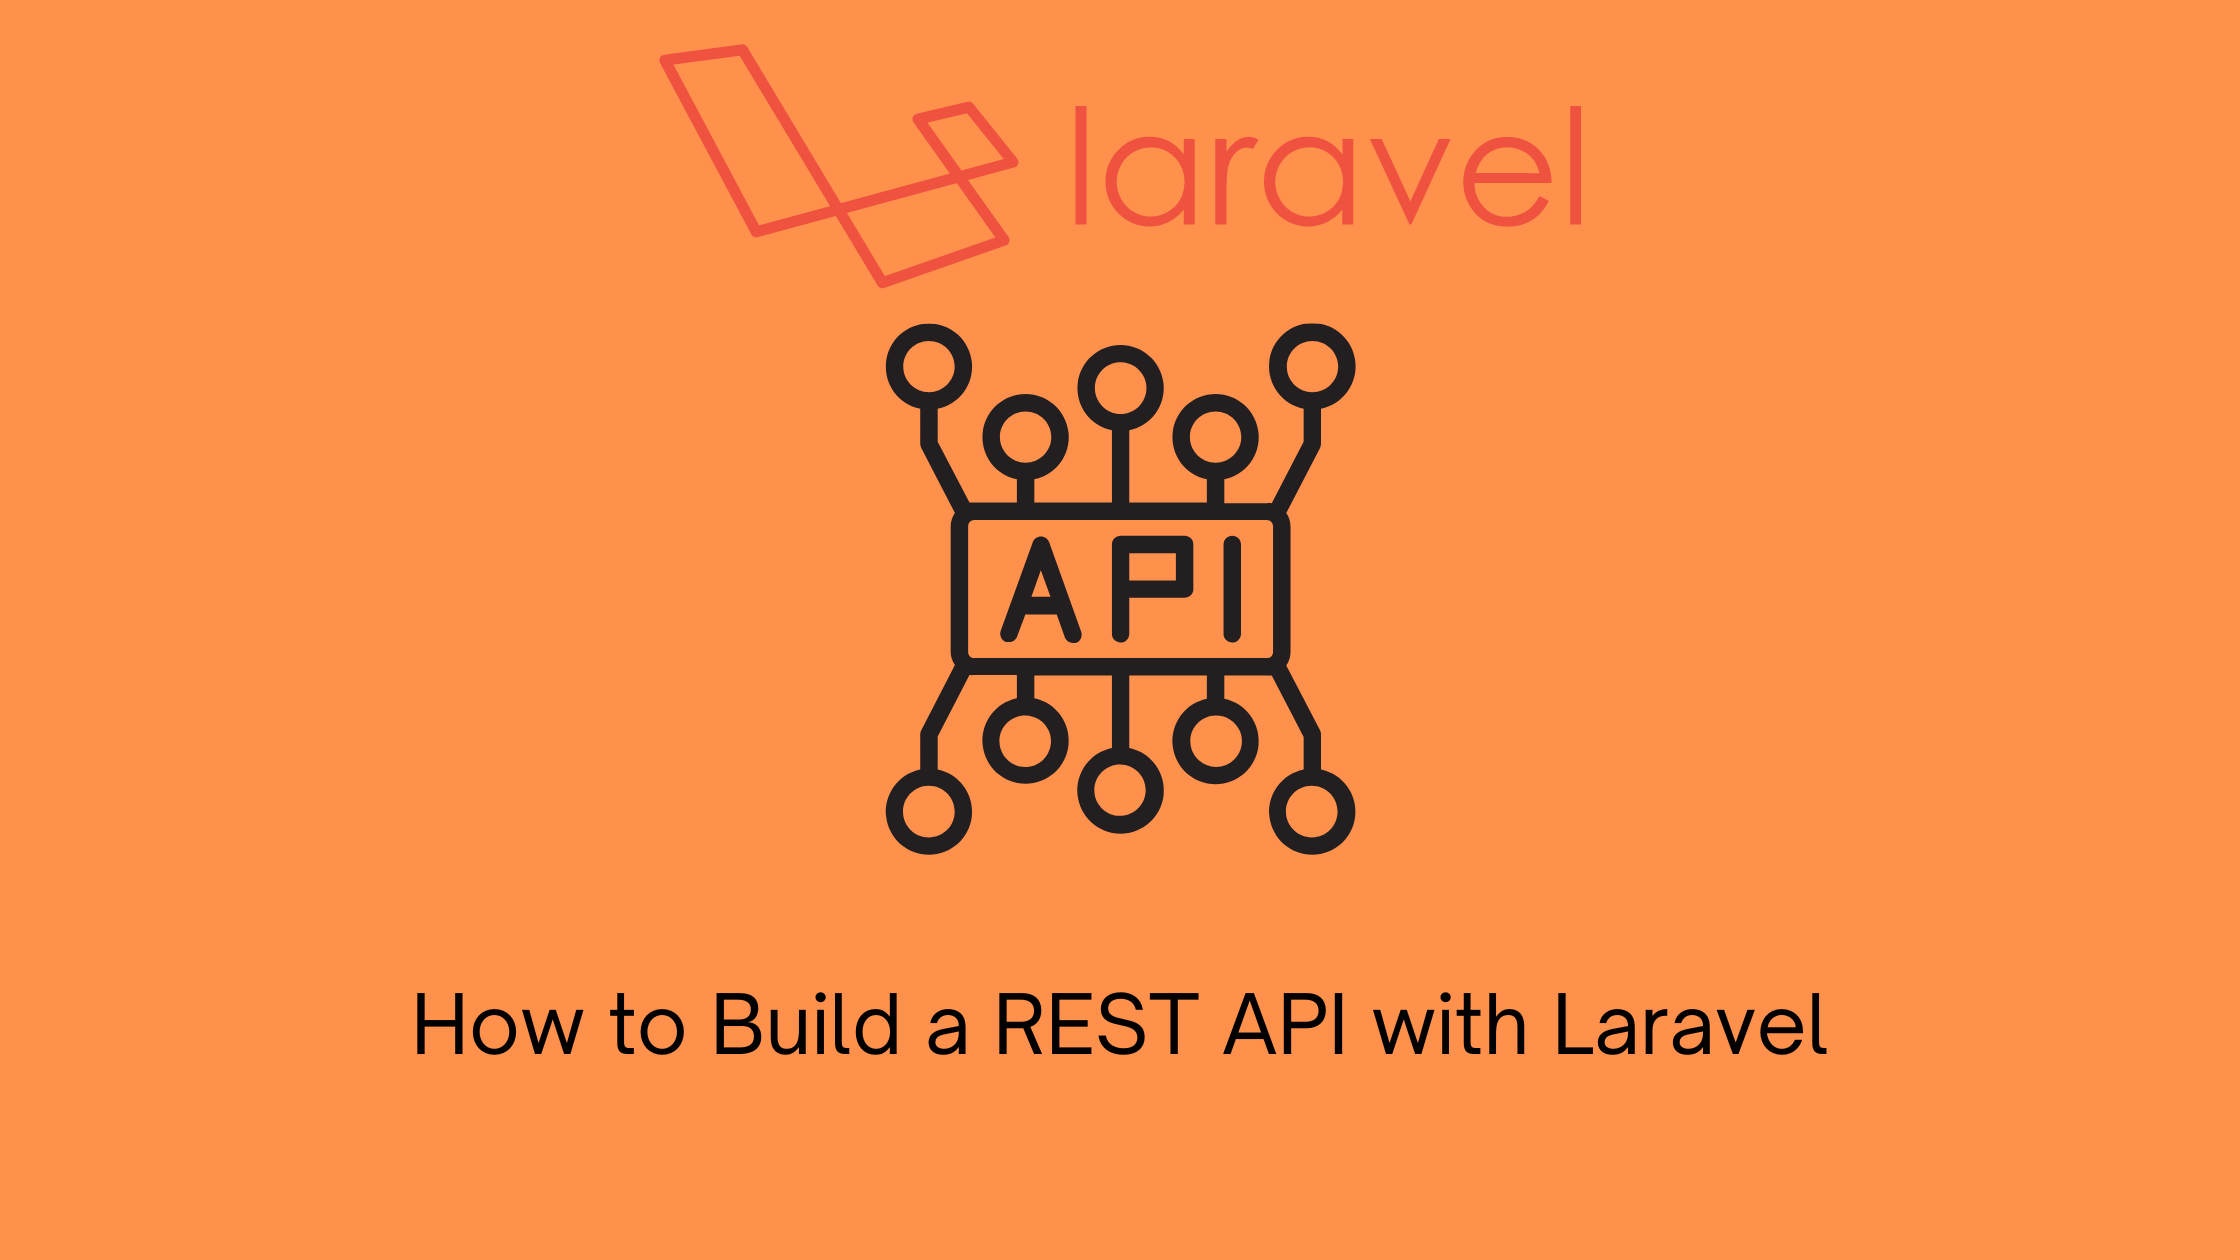 How to Build a Rest API with Laravel